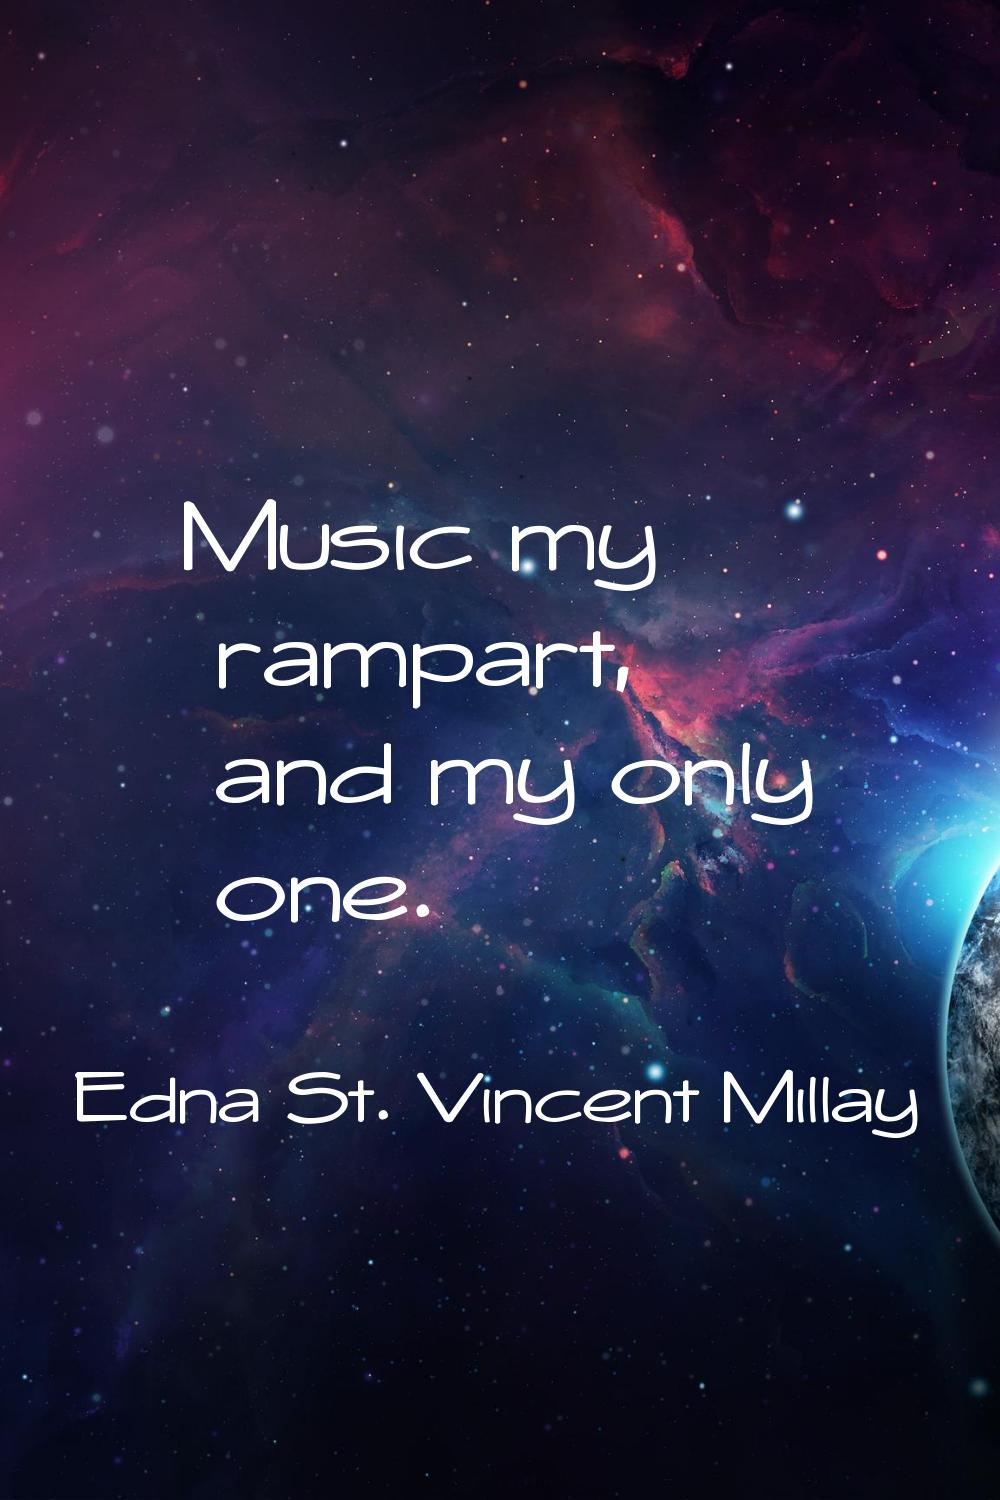 Music my rampart, and my only one.